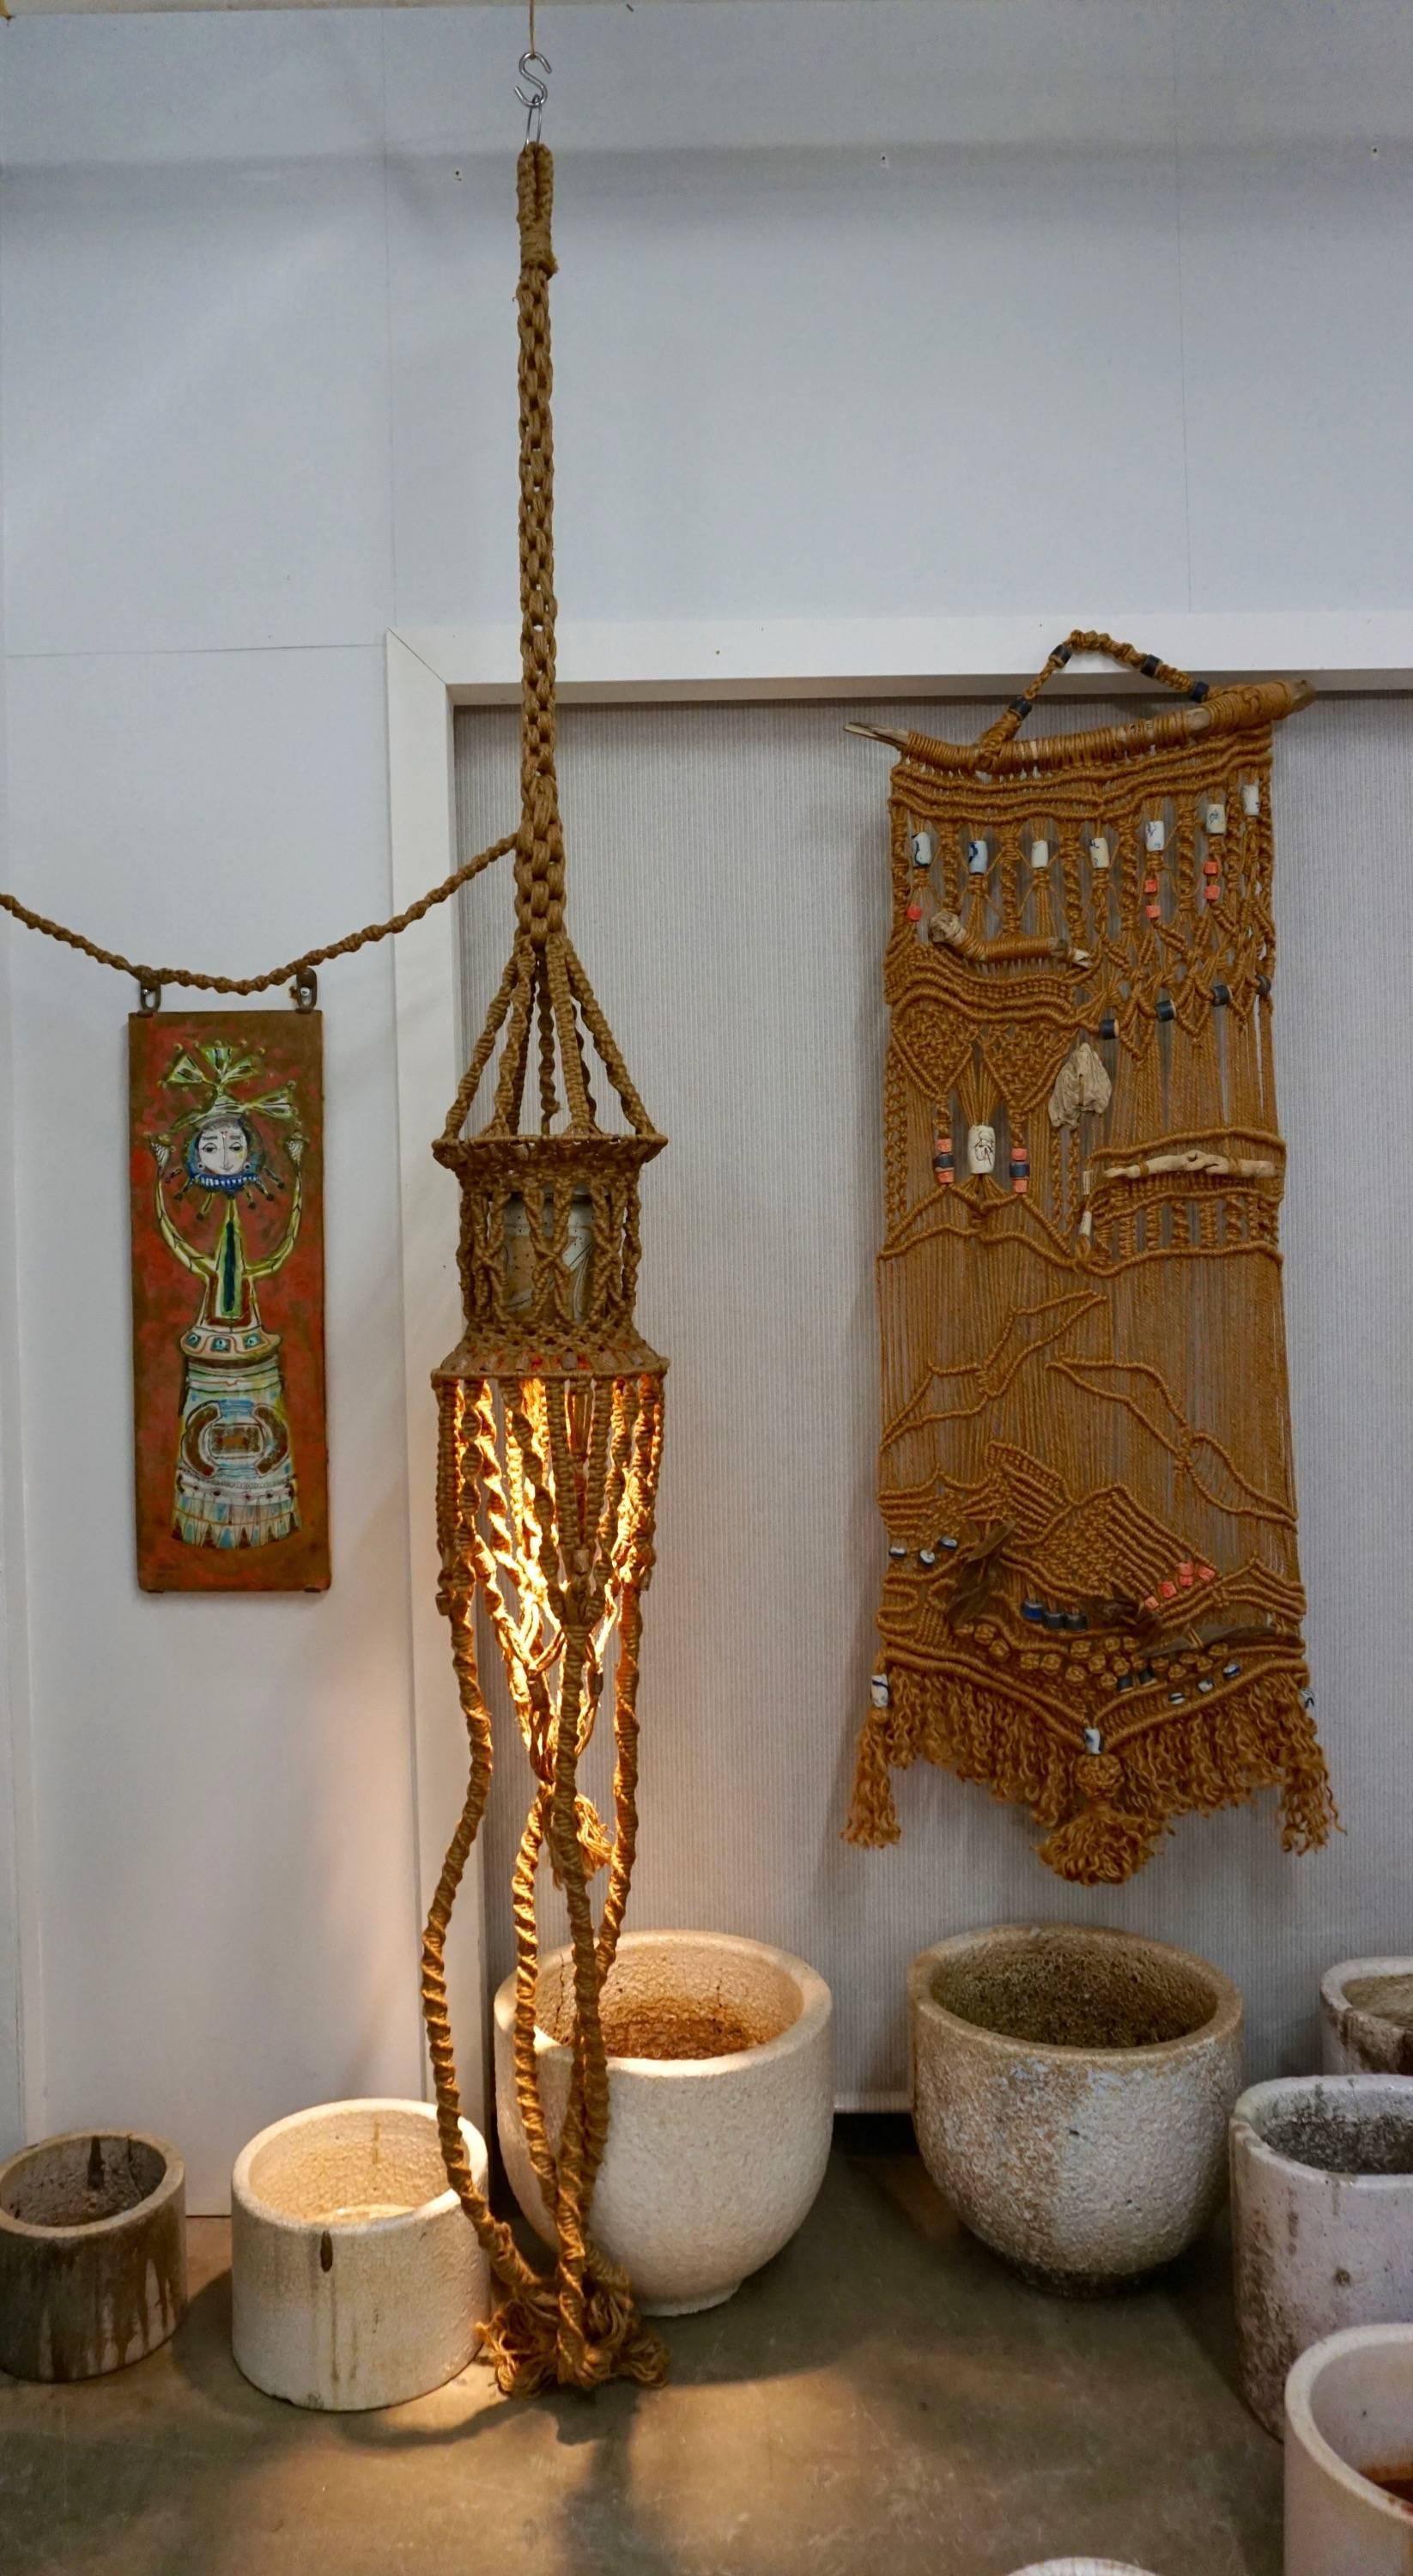 9.5 ft. floor to ceiling macrame lamp with ceramic shade and macrame swag.
ceramic beads incorporated in to the lamp.